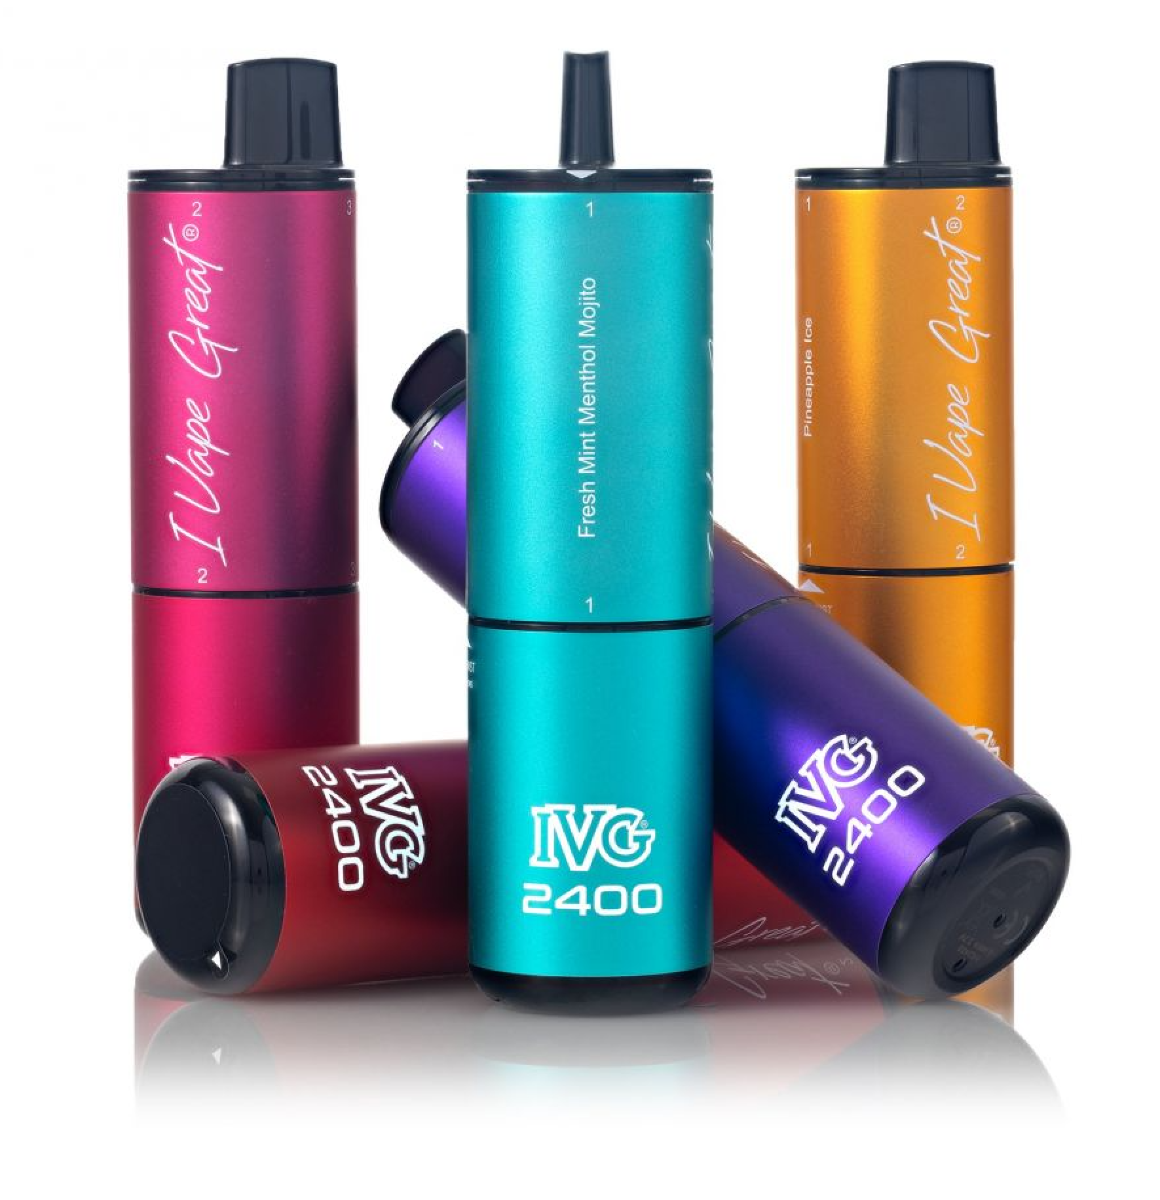 IVG 2400 Puff Disposable Device